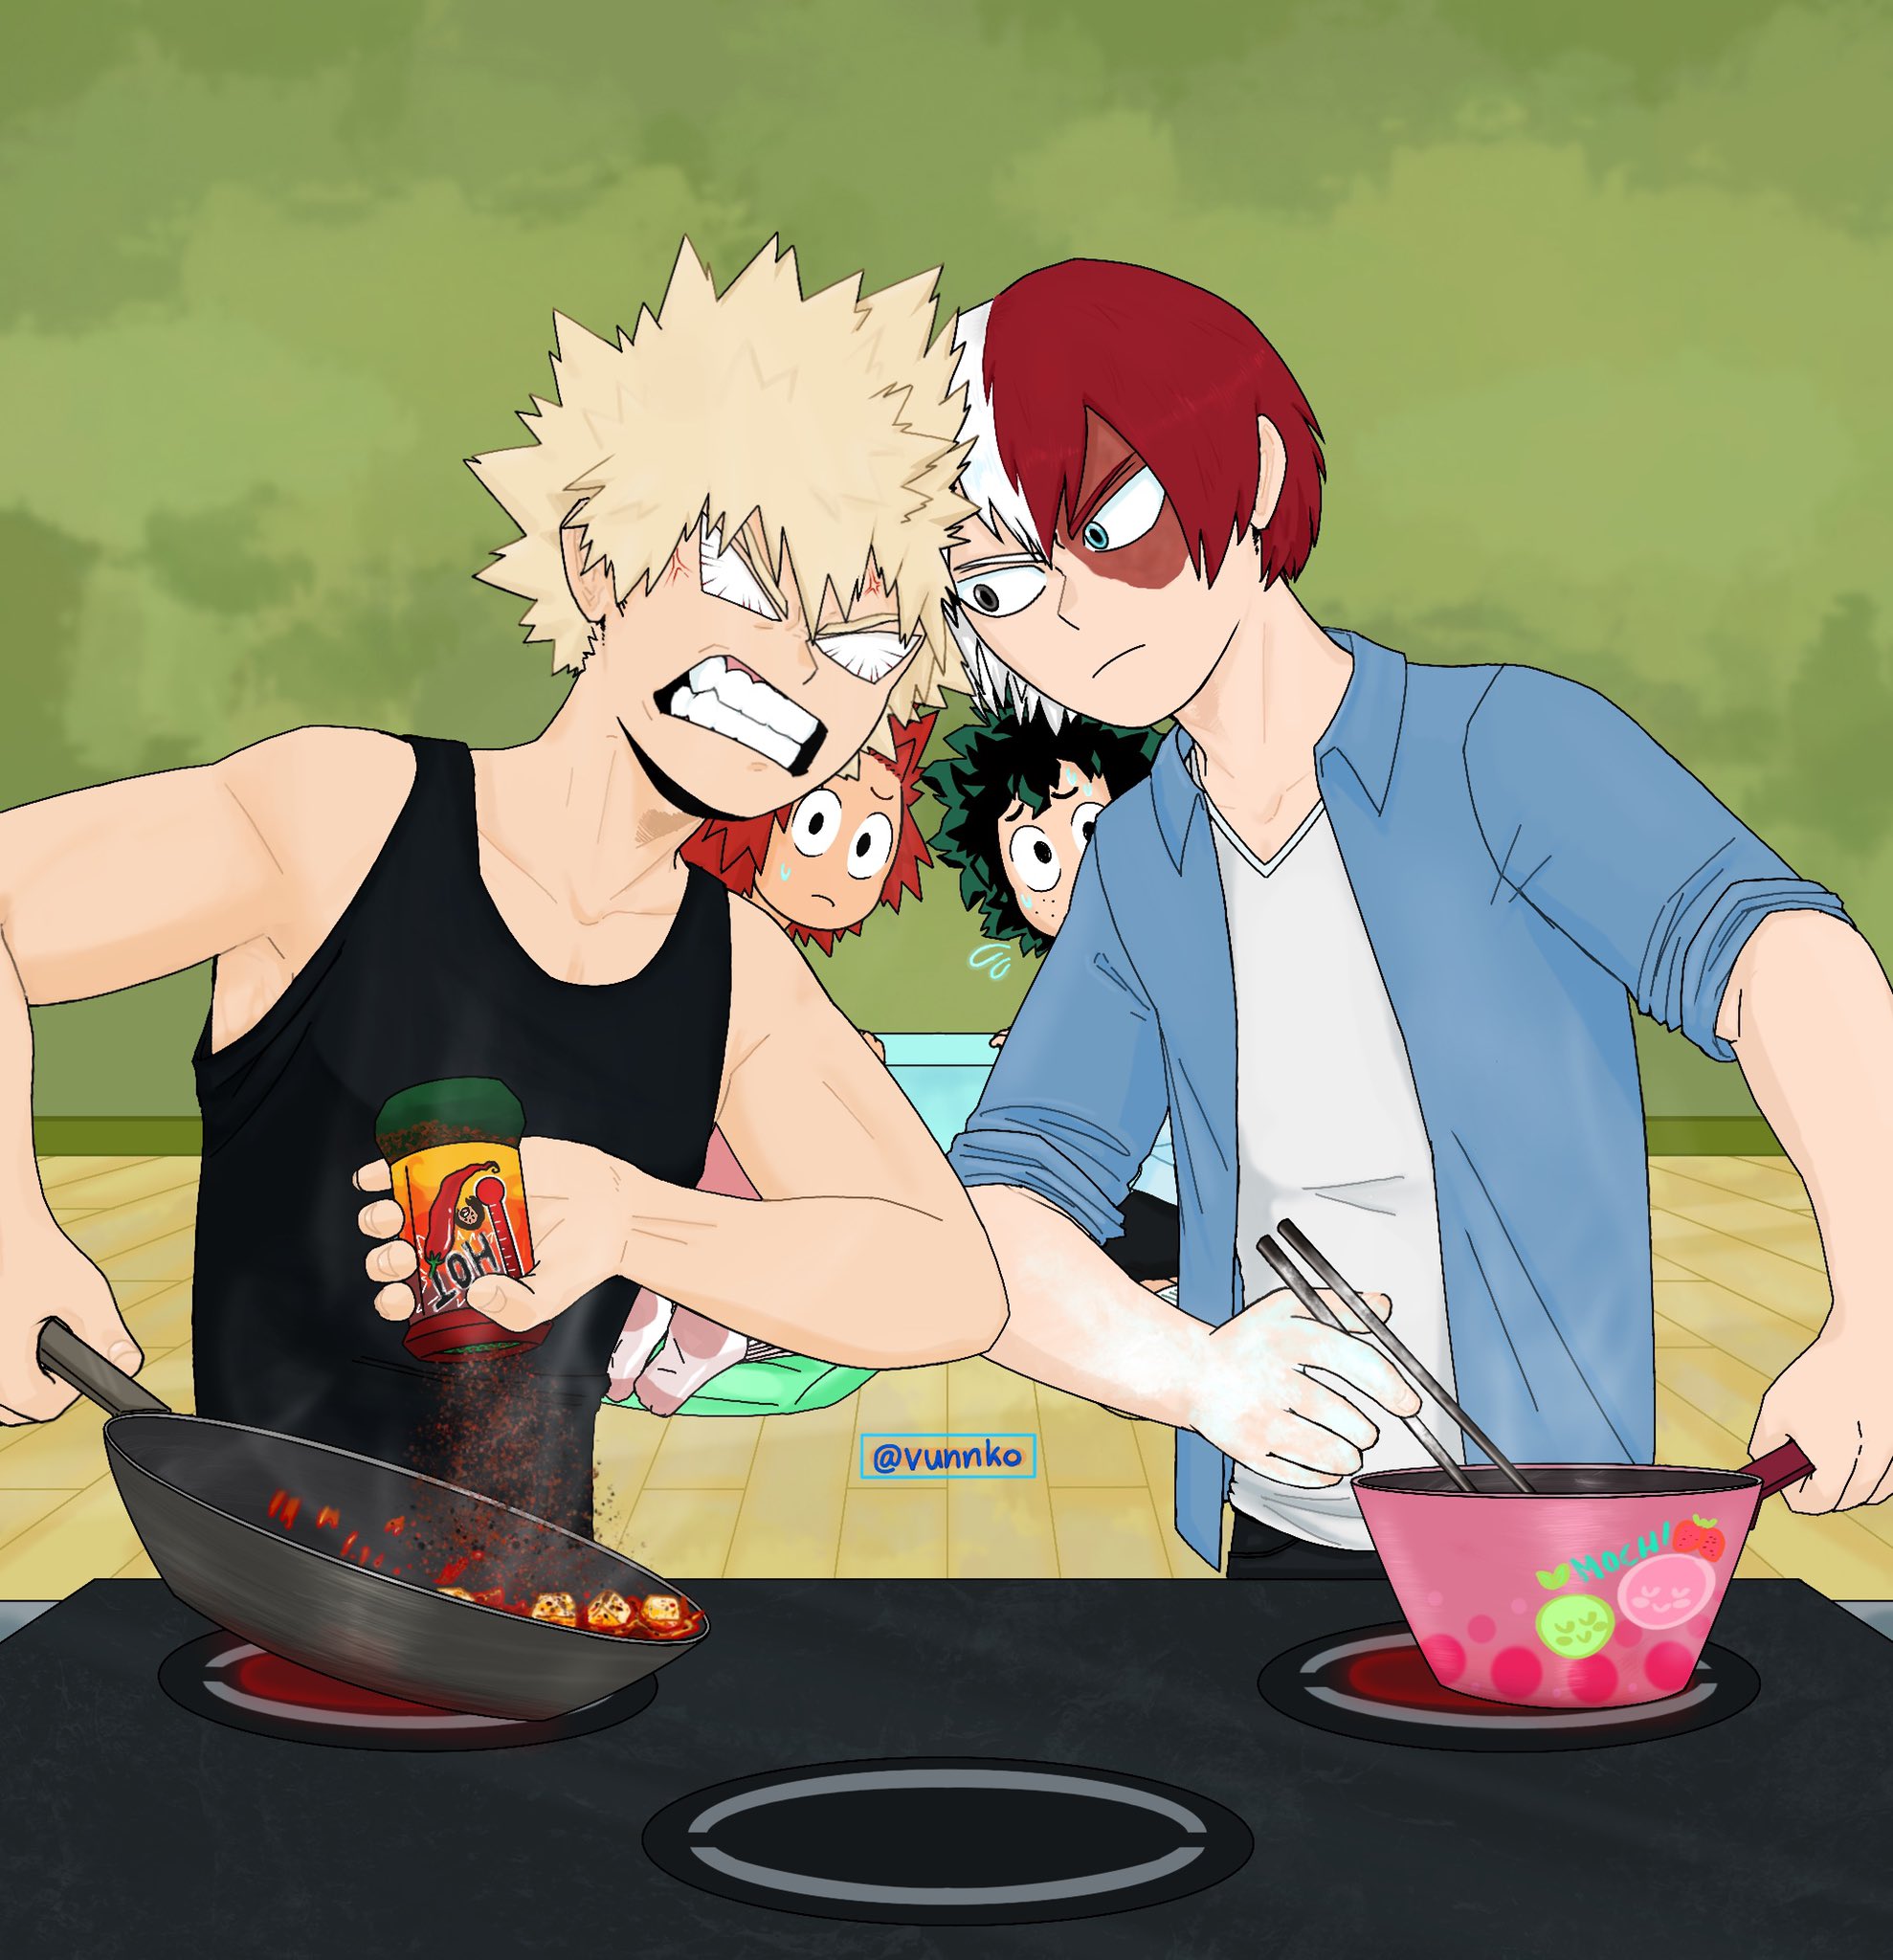 yenni on Twitter: "Idk if u can tell what bakugou is making, so points...